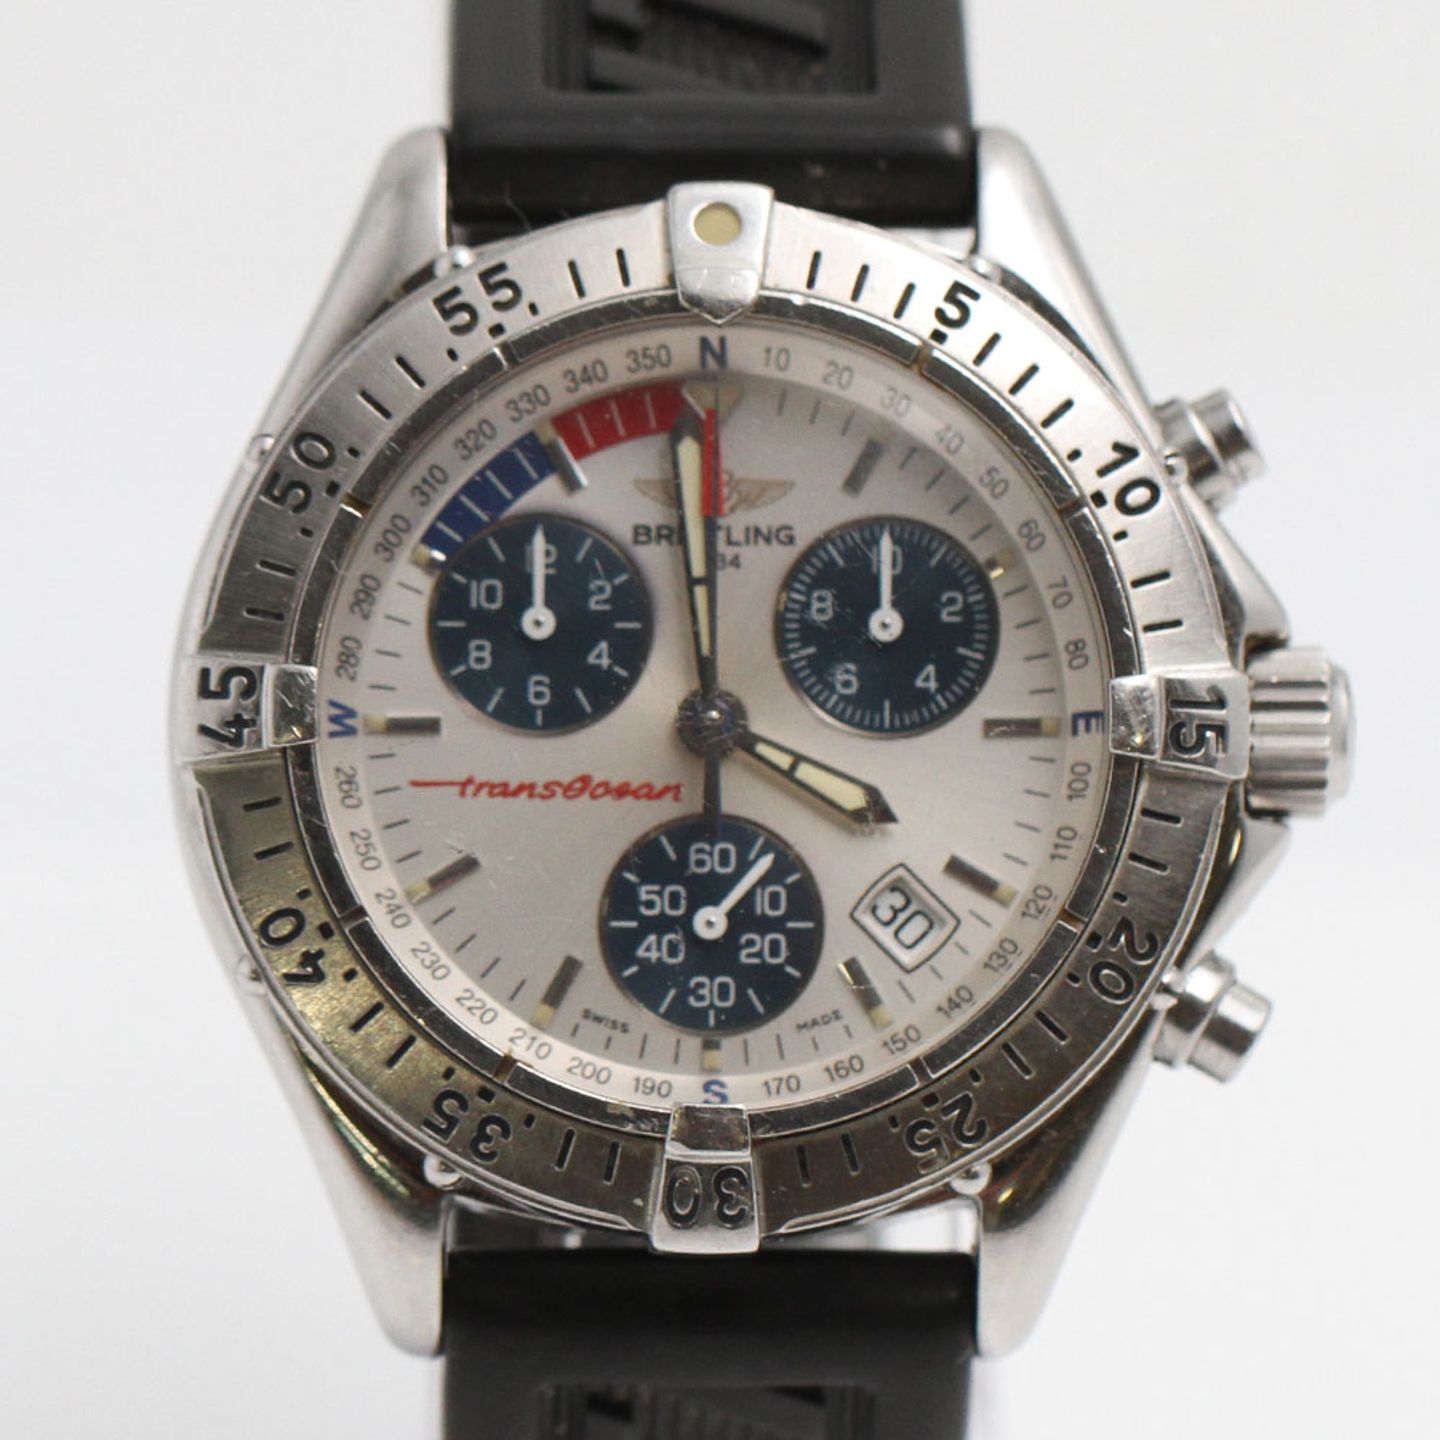 Breitling Transocean Chronograph A53040.1 (Unknown (random serial)) - White dial 42 mm Steel case (1/6)